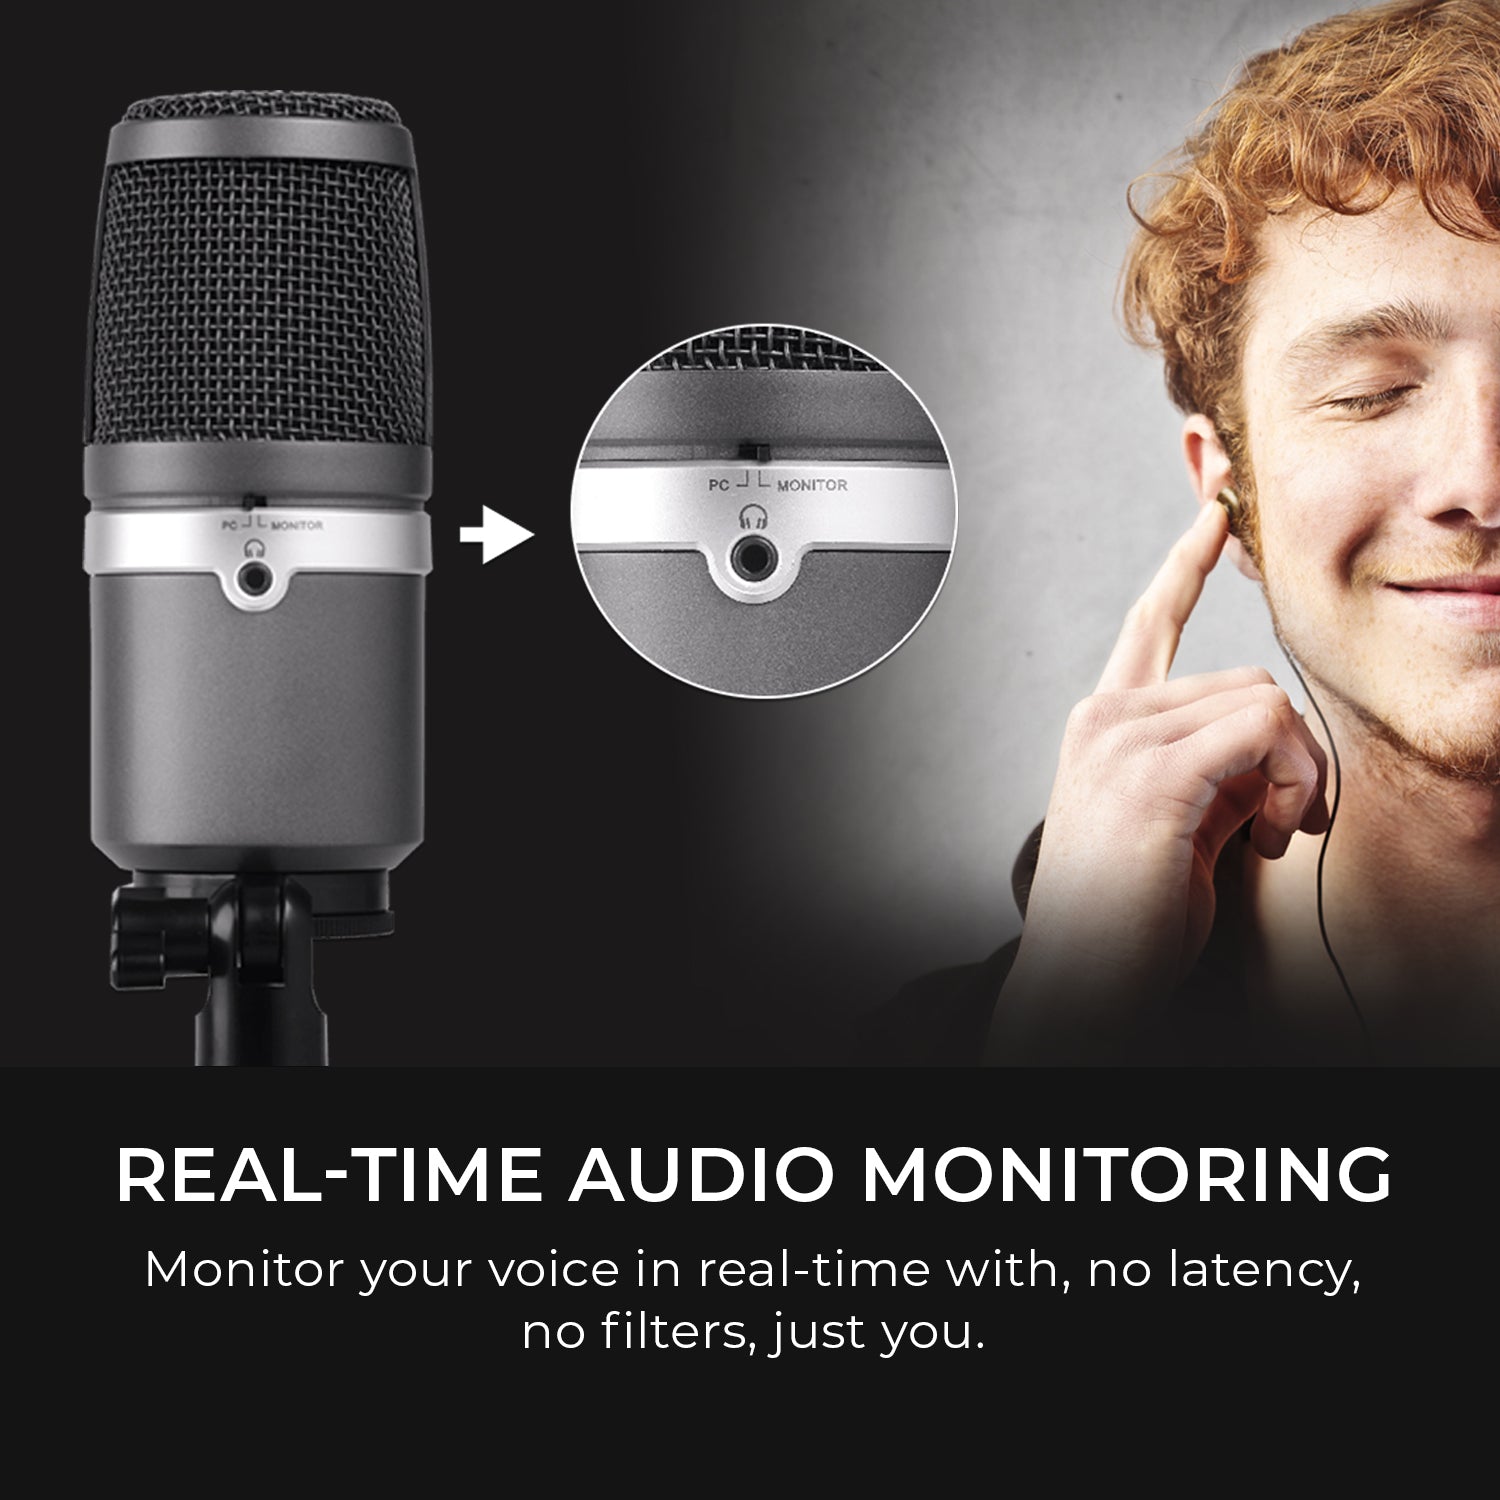 Real-time audio monitoring: Monitor your voice in real-time with no latency, no filters, just you.